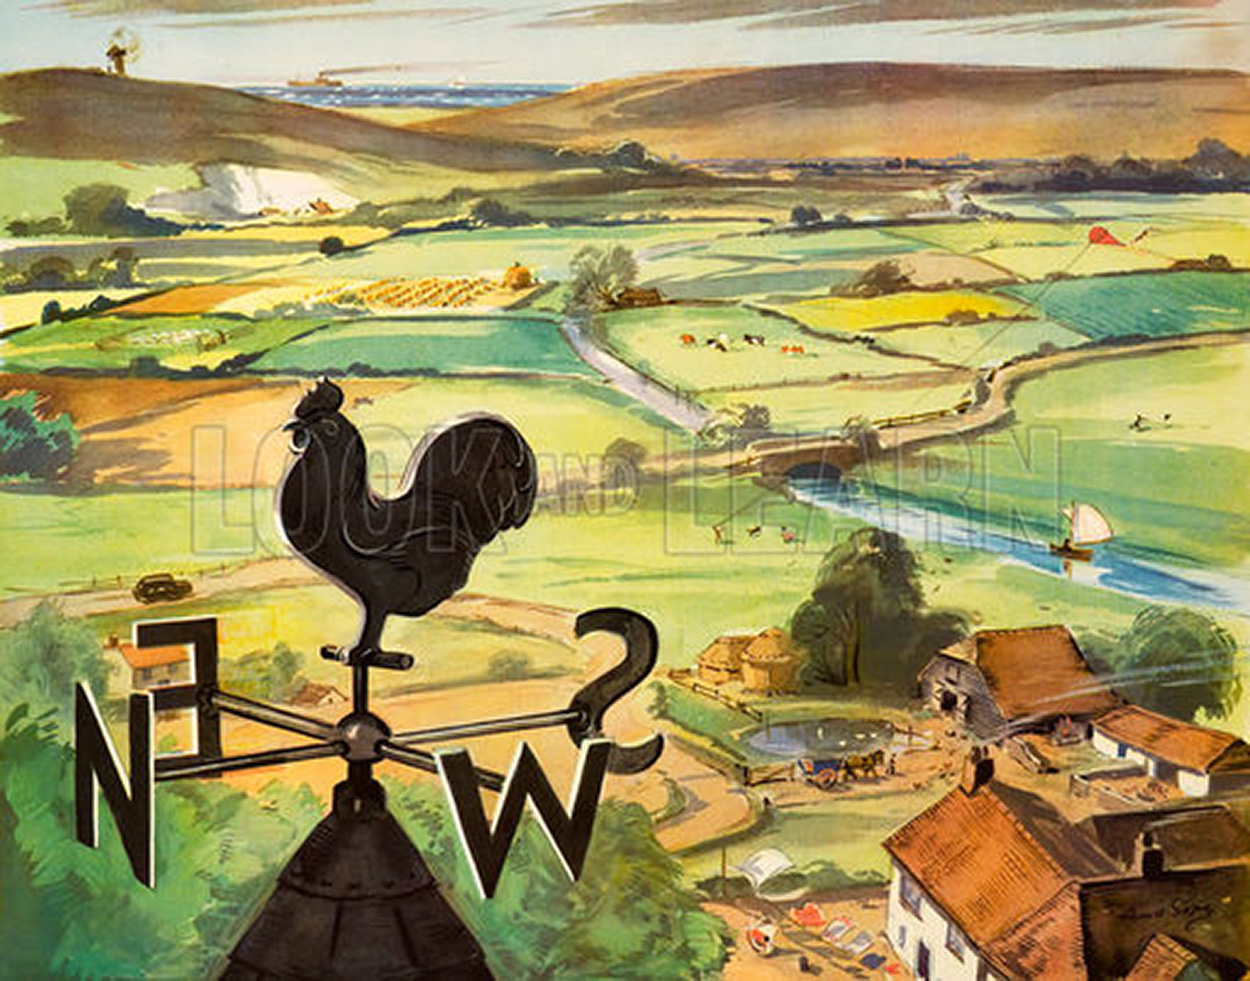 The Clever Weather Cock (Original Macmillan Poster) (Print) art by Eileen Soper at The Illustration Art Gallery